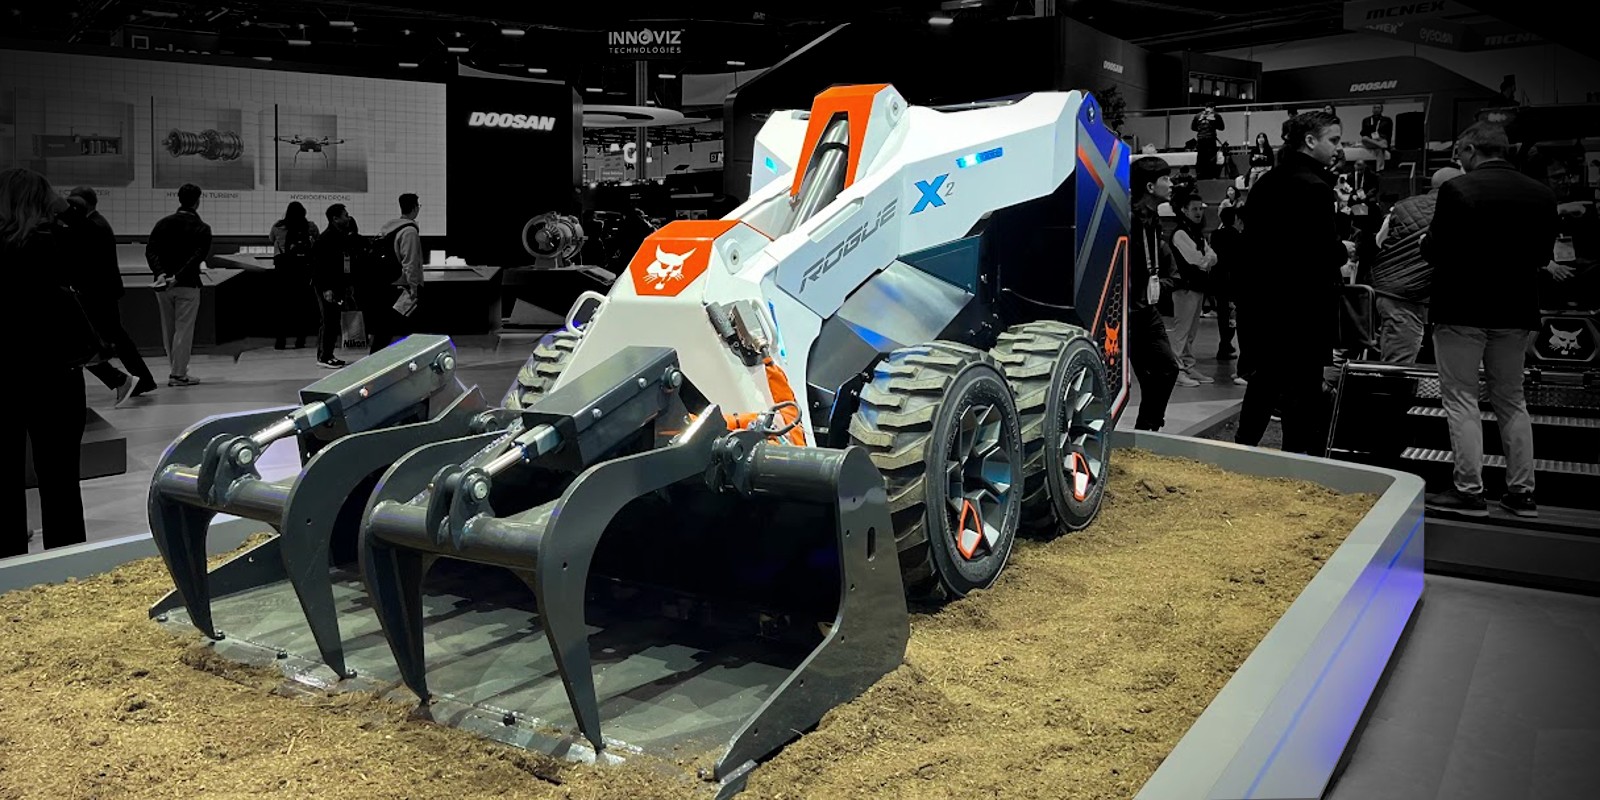 Bobcat brought robots, augmented reality, and a new EV to CES